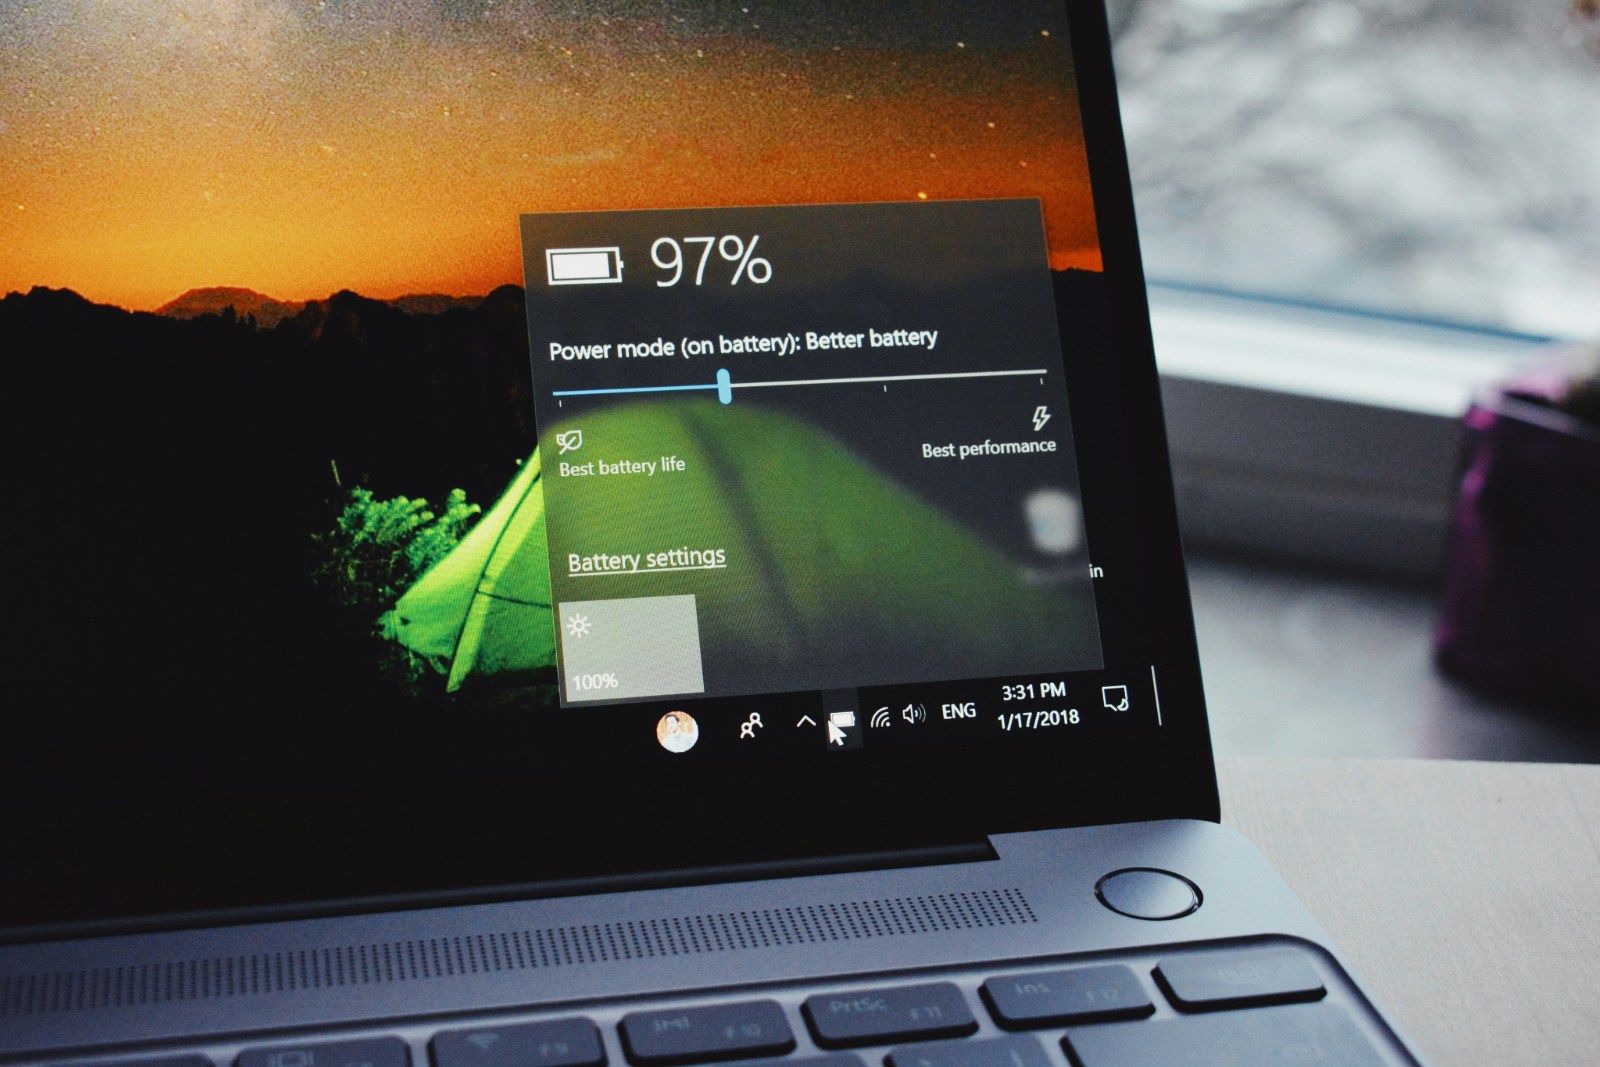 A laptop screen displaying a 97% battery status with power mode options, set against a sunset background wallpaper.